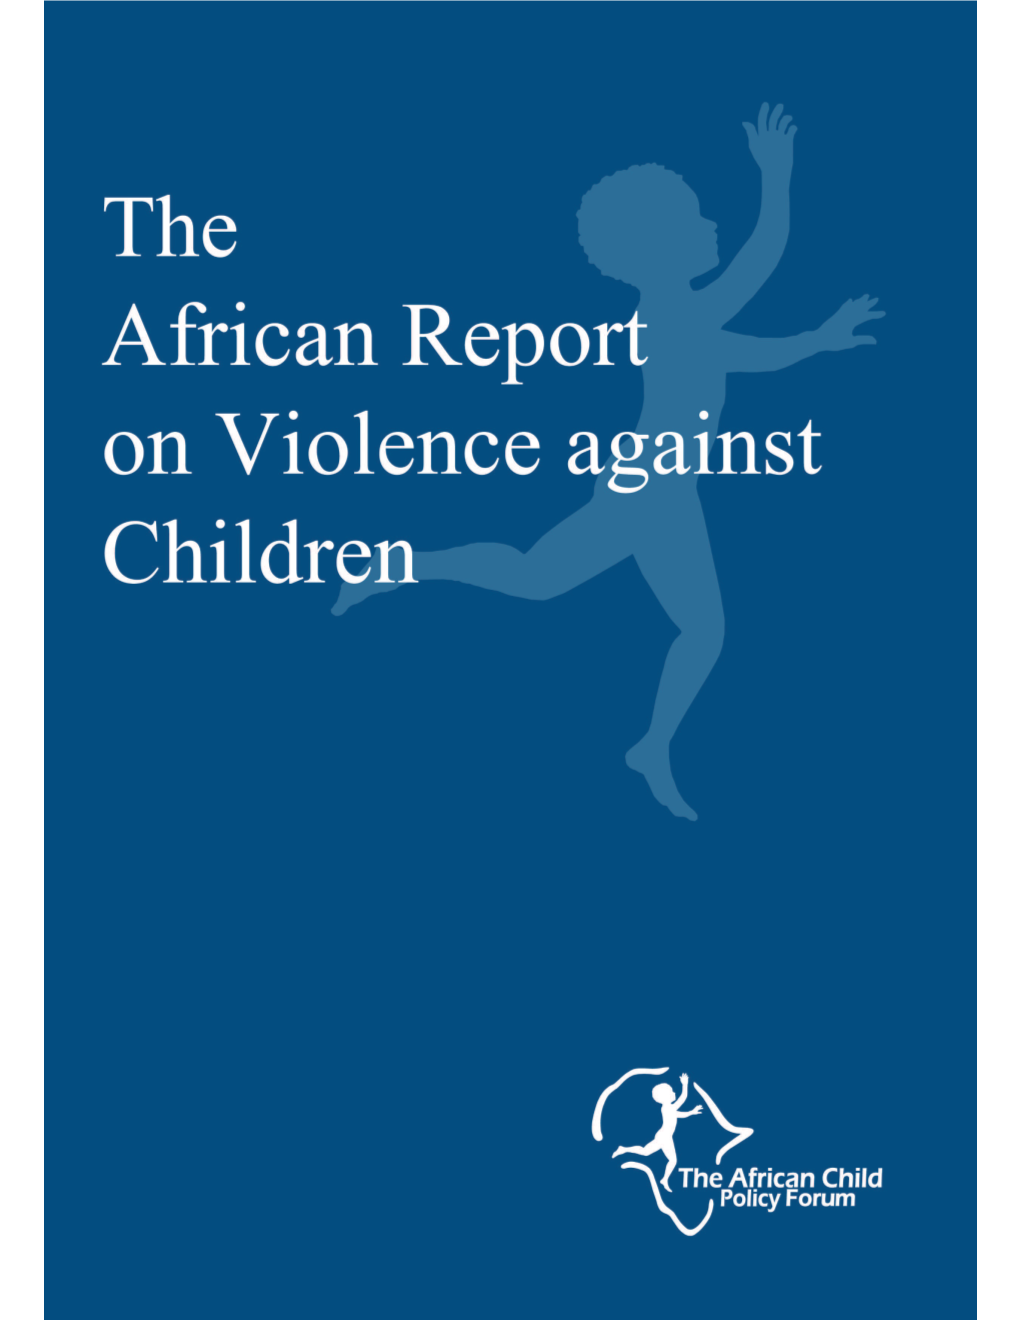 The African Report on Violence Against Children the a FRICAN C HILD P OLICY F ORUM (ACPF)